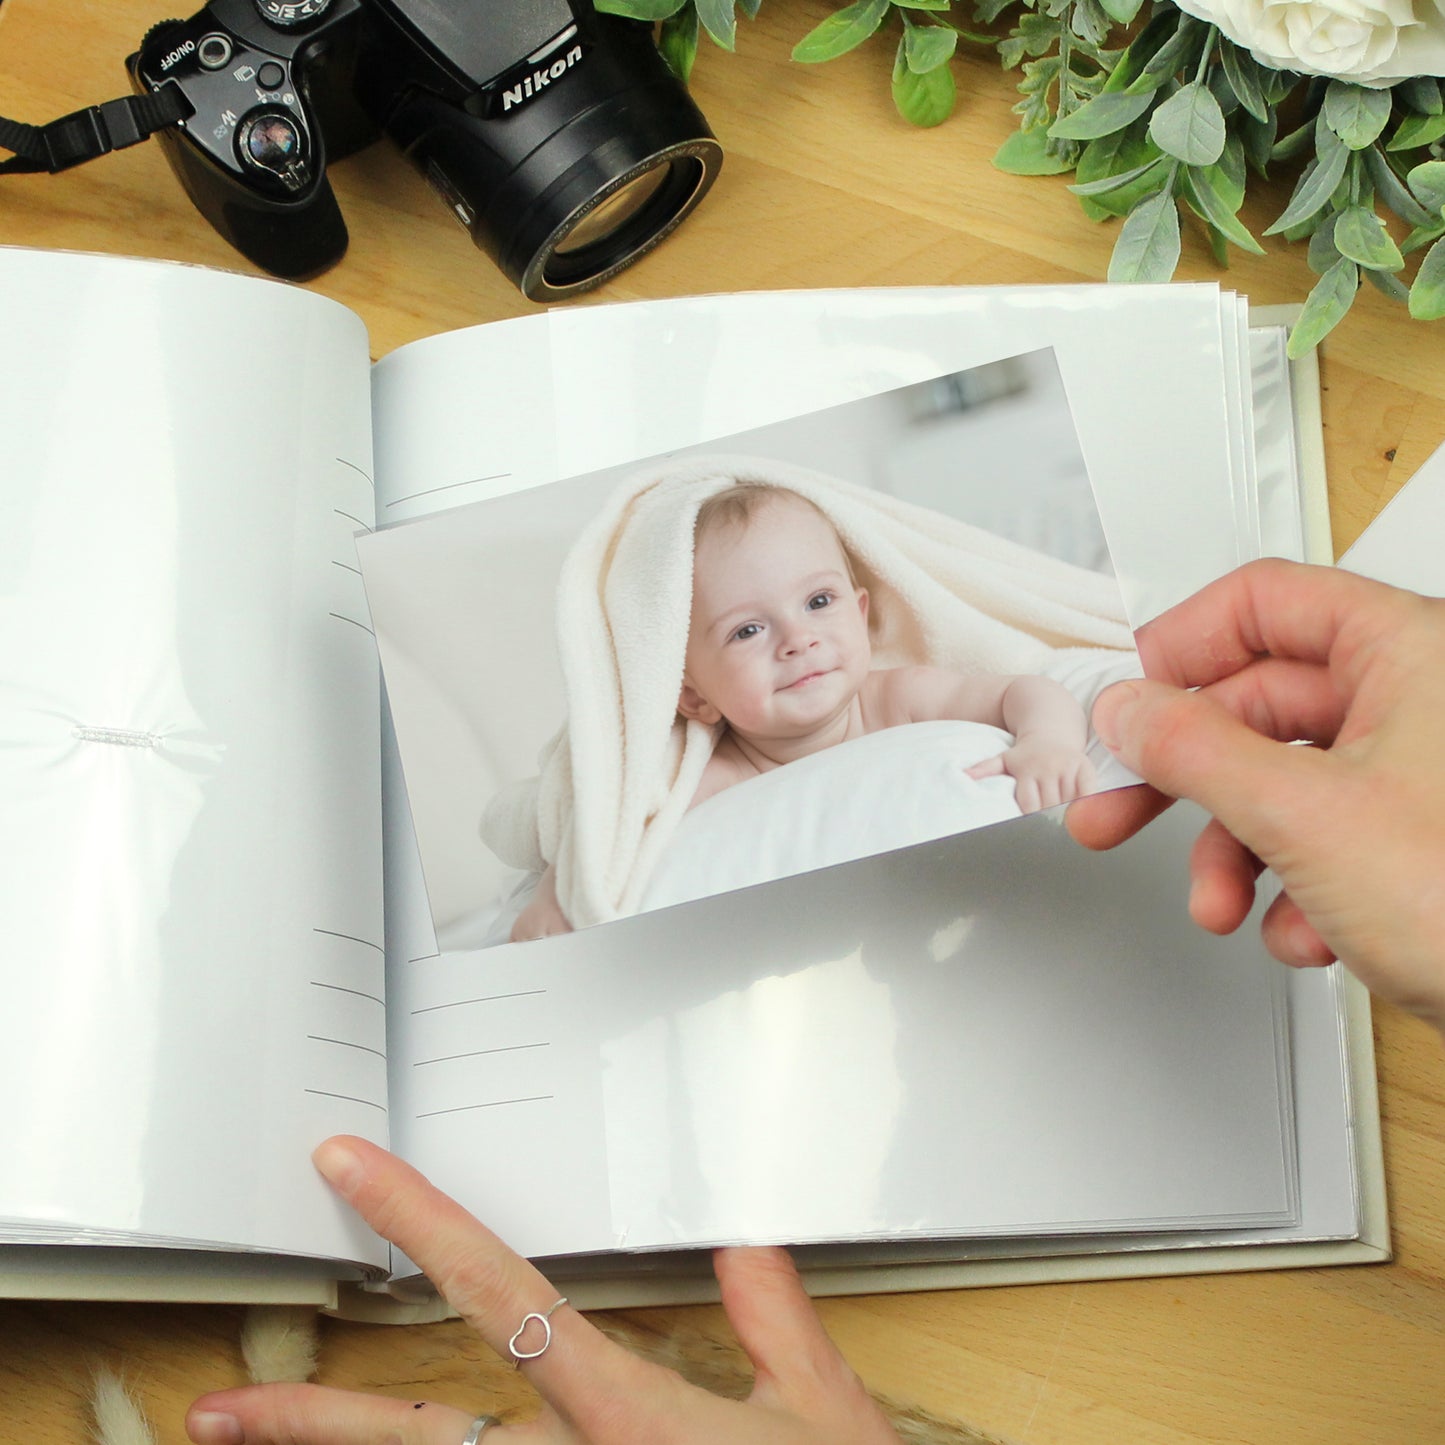 Personalised Floral Wreath Photo Album - Birthday Or Baby